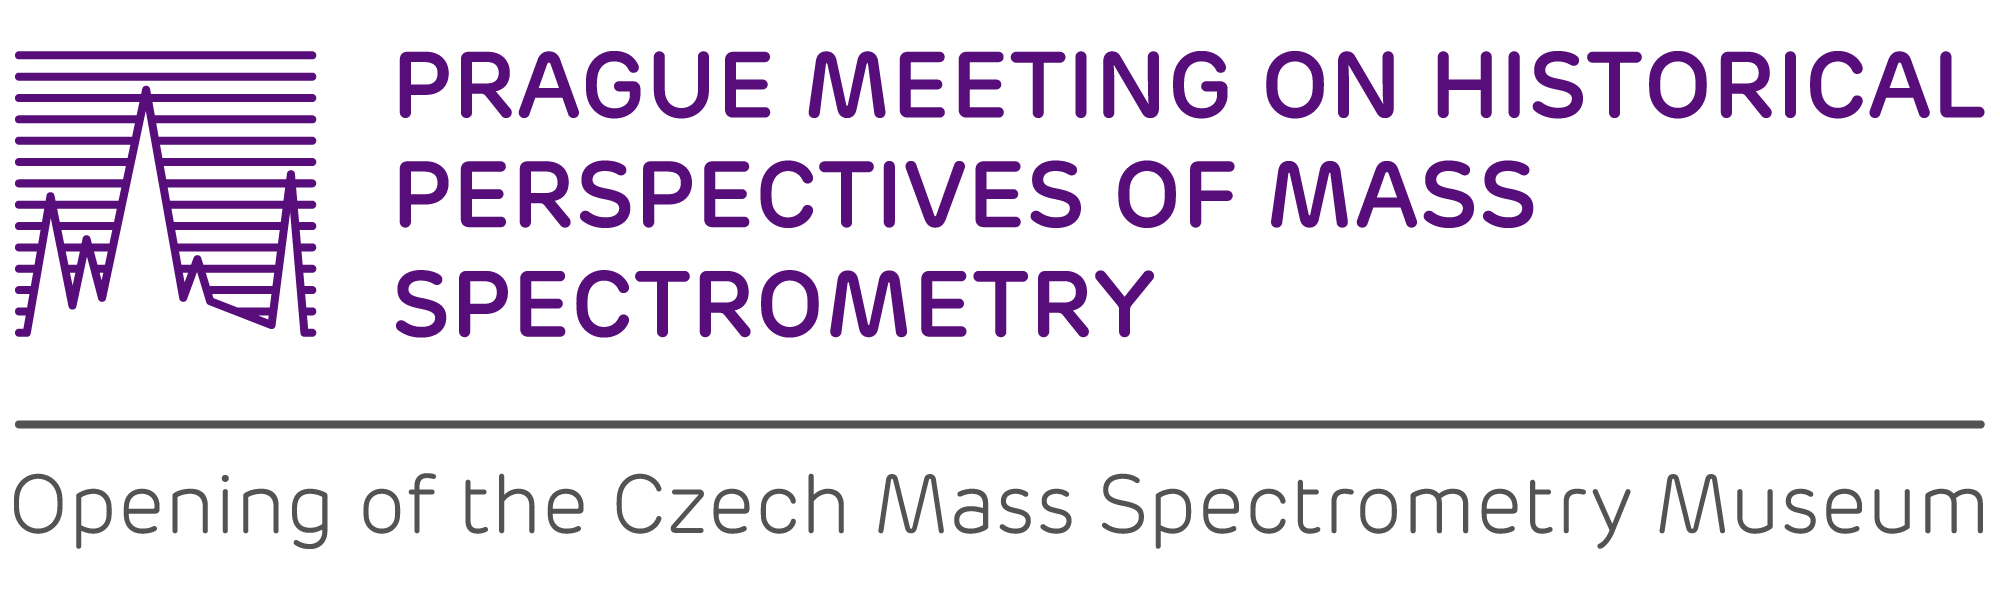 Prague Meeting on Historical Perspectives of Mass Spectrometry